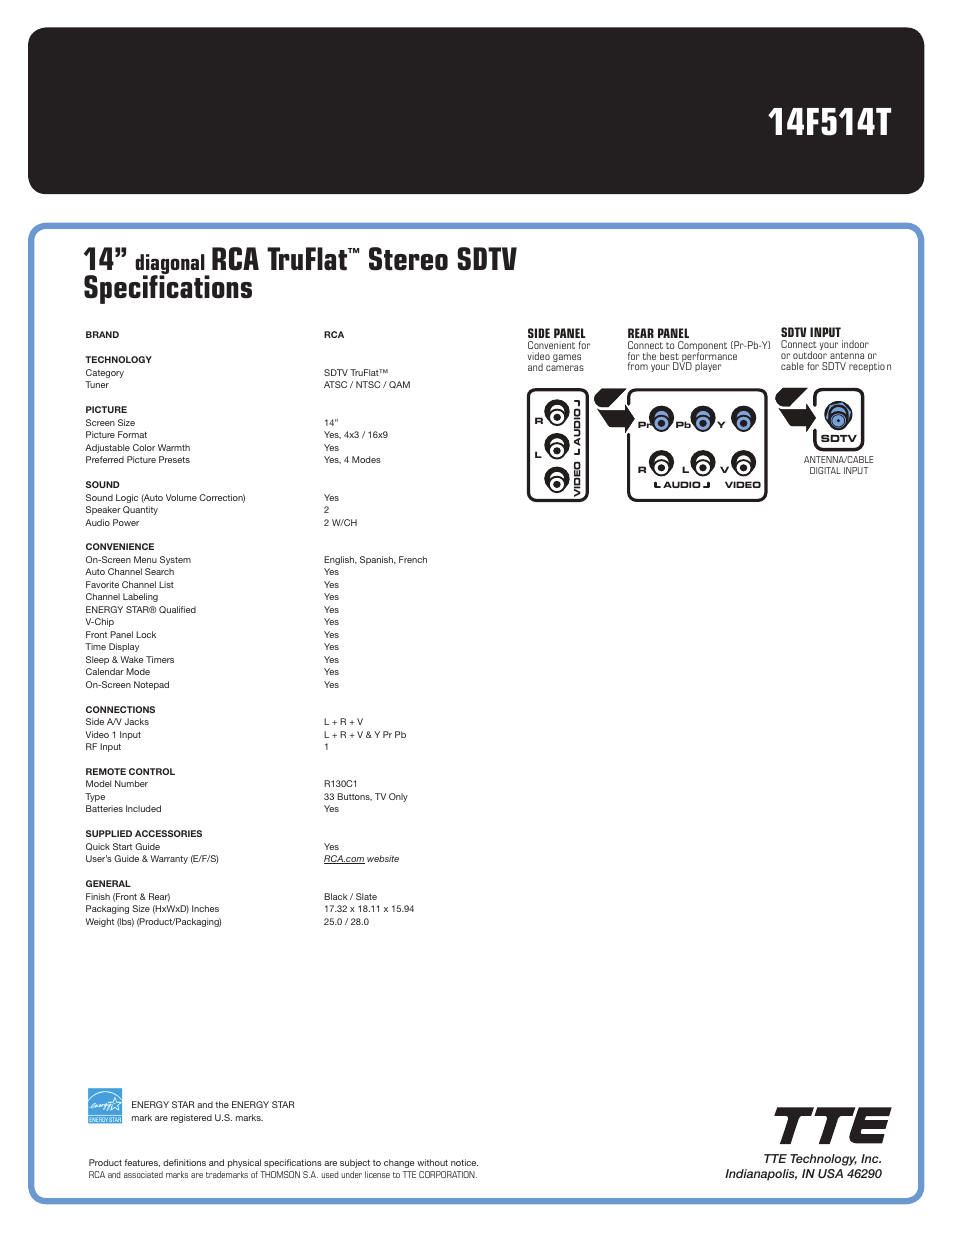 Rca truflat, Stereo sdtv specifications, Diagonal | RCA TruFlat 14F514T